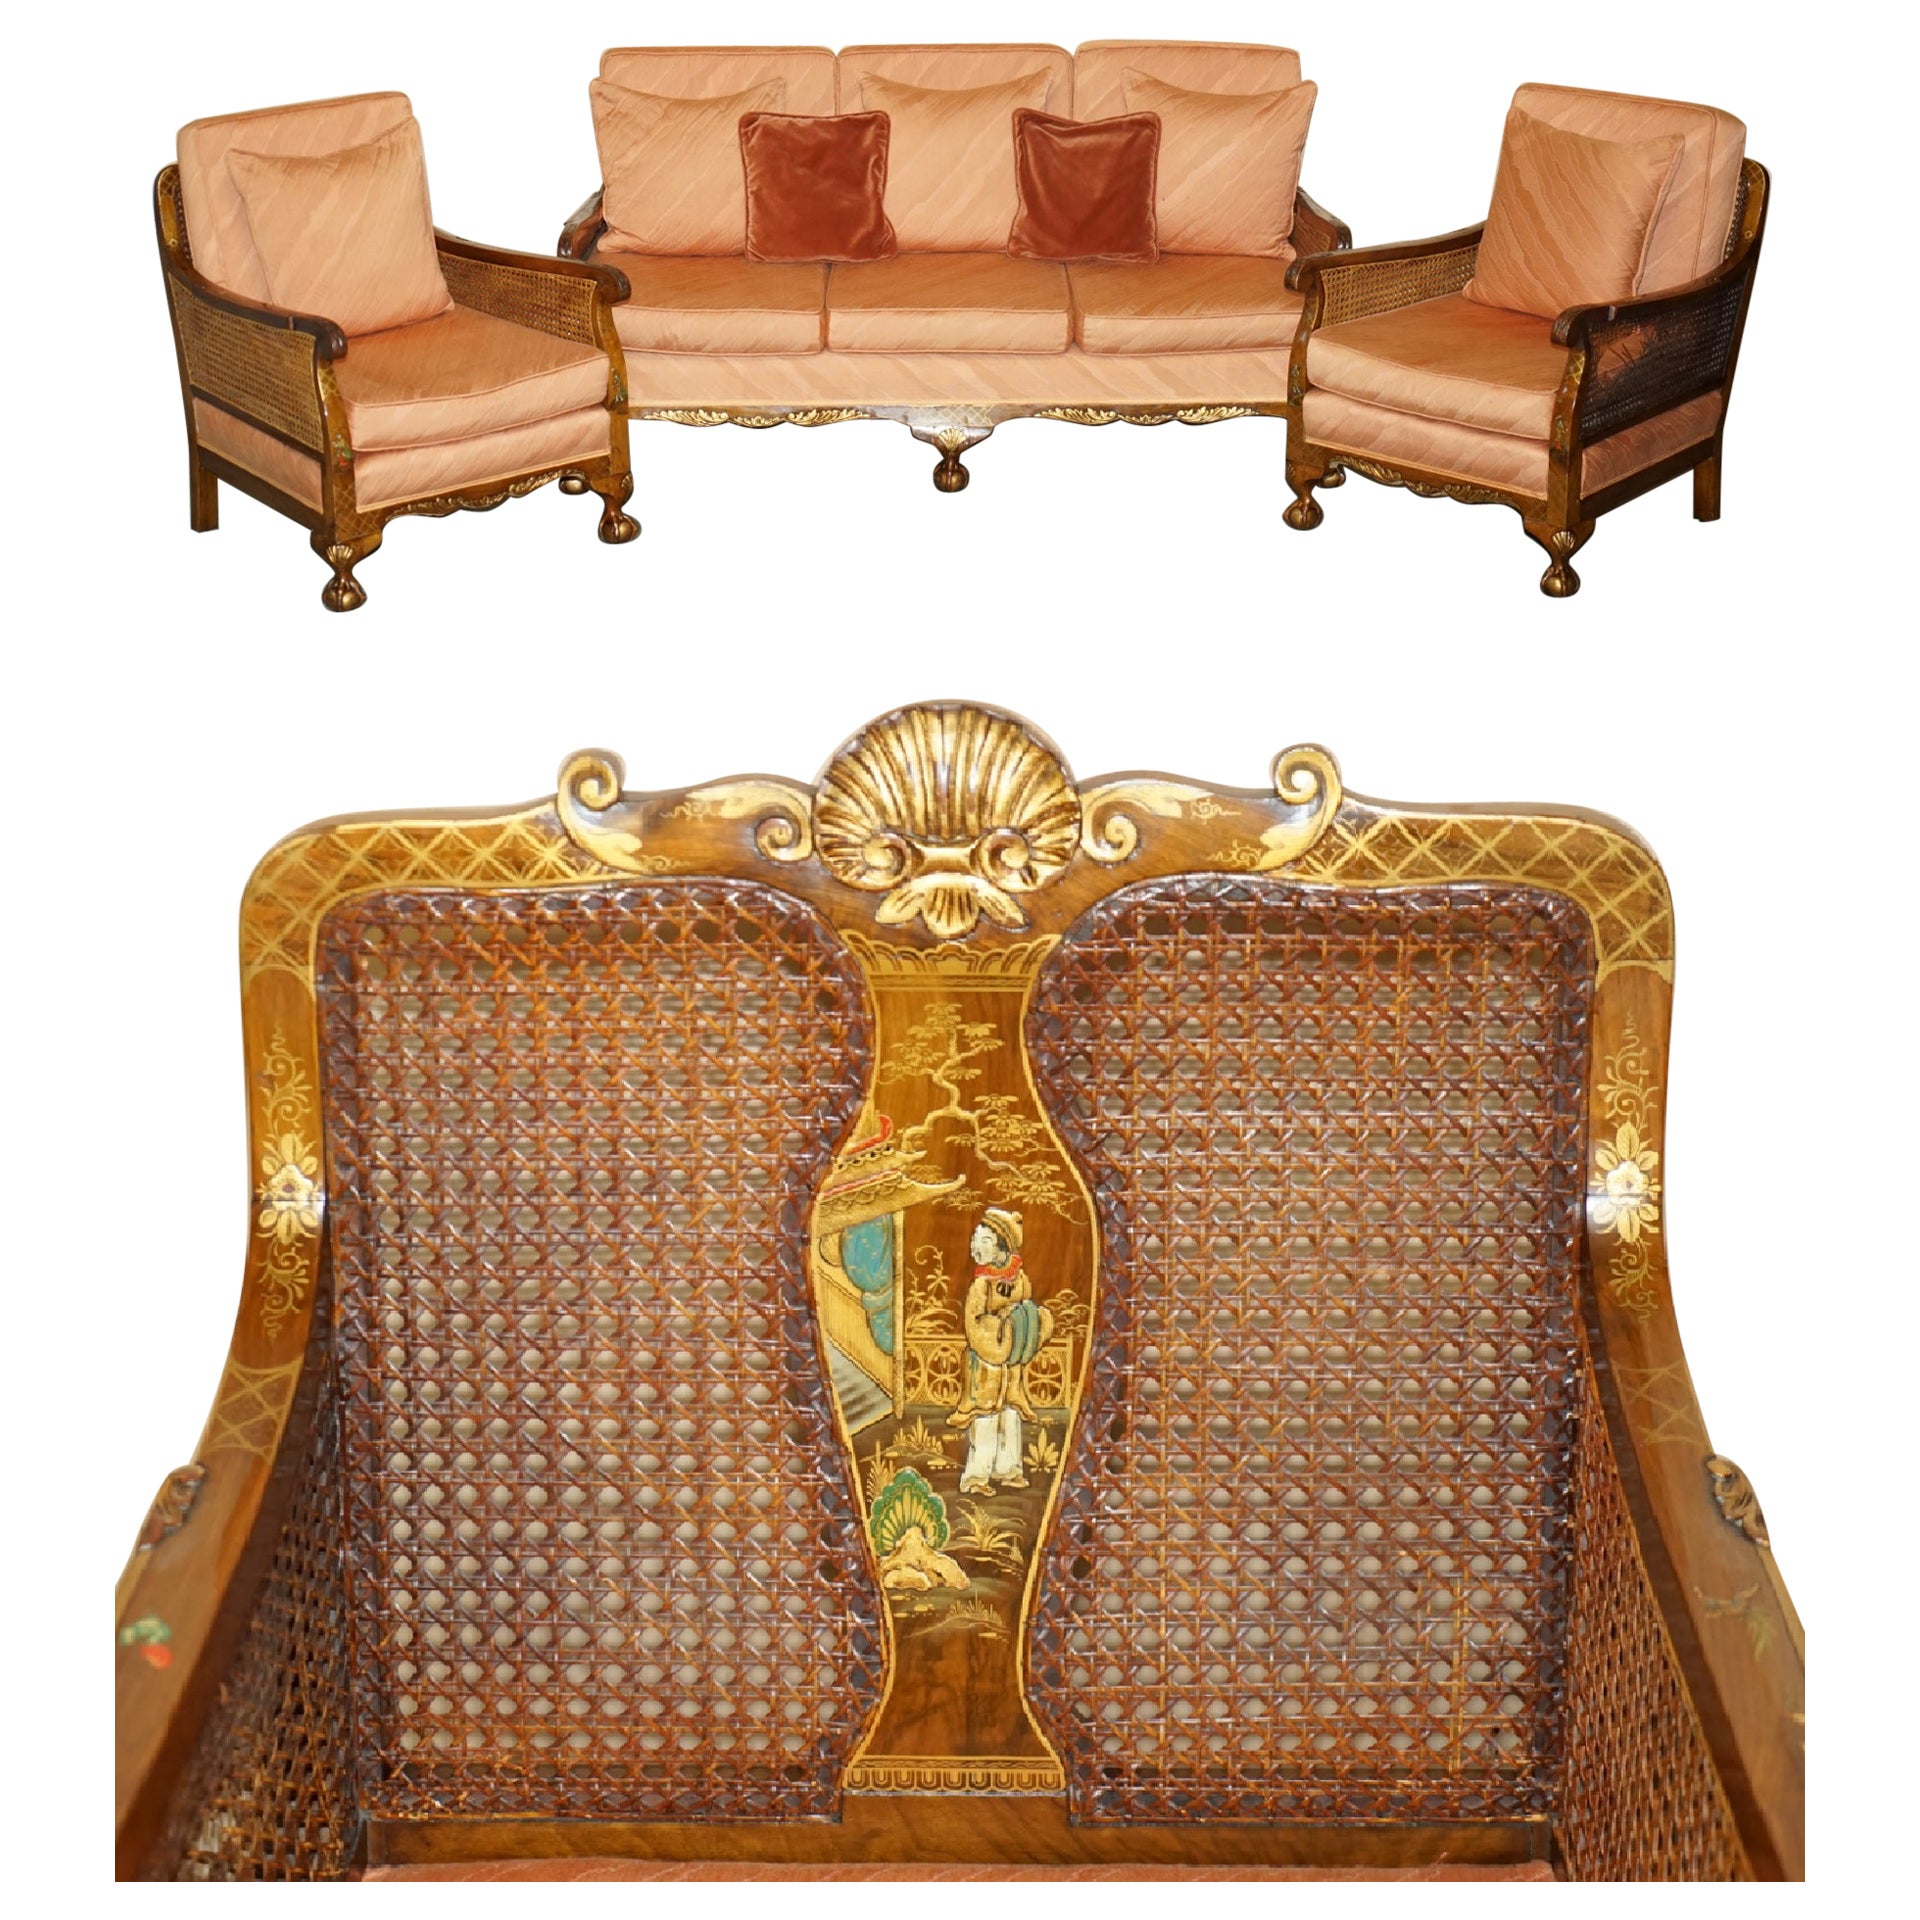 1920's WALNUT & CHINOISERIE 3 PIECE BERGERE SOFA ARMCHAIR SUITE FOR RESTORATION